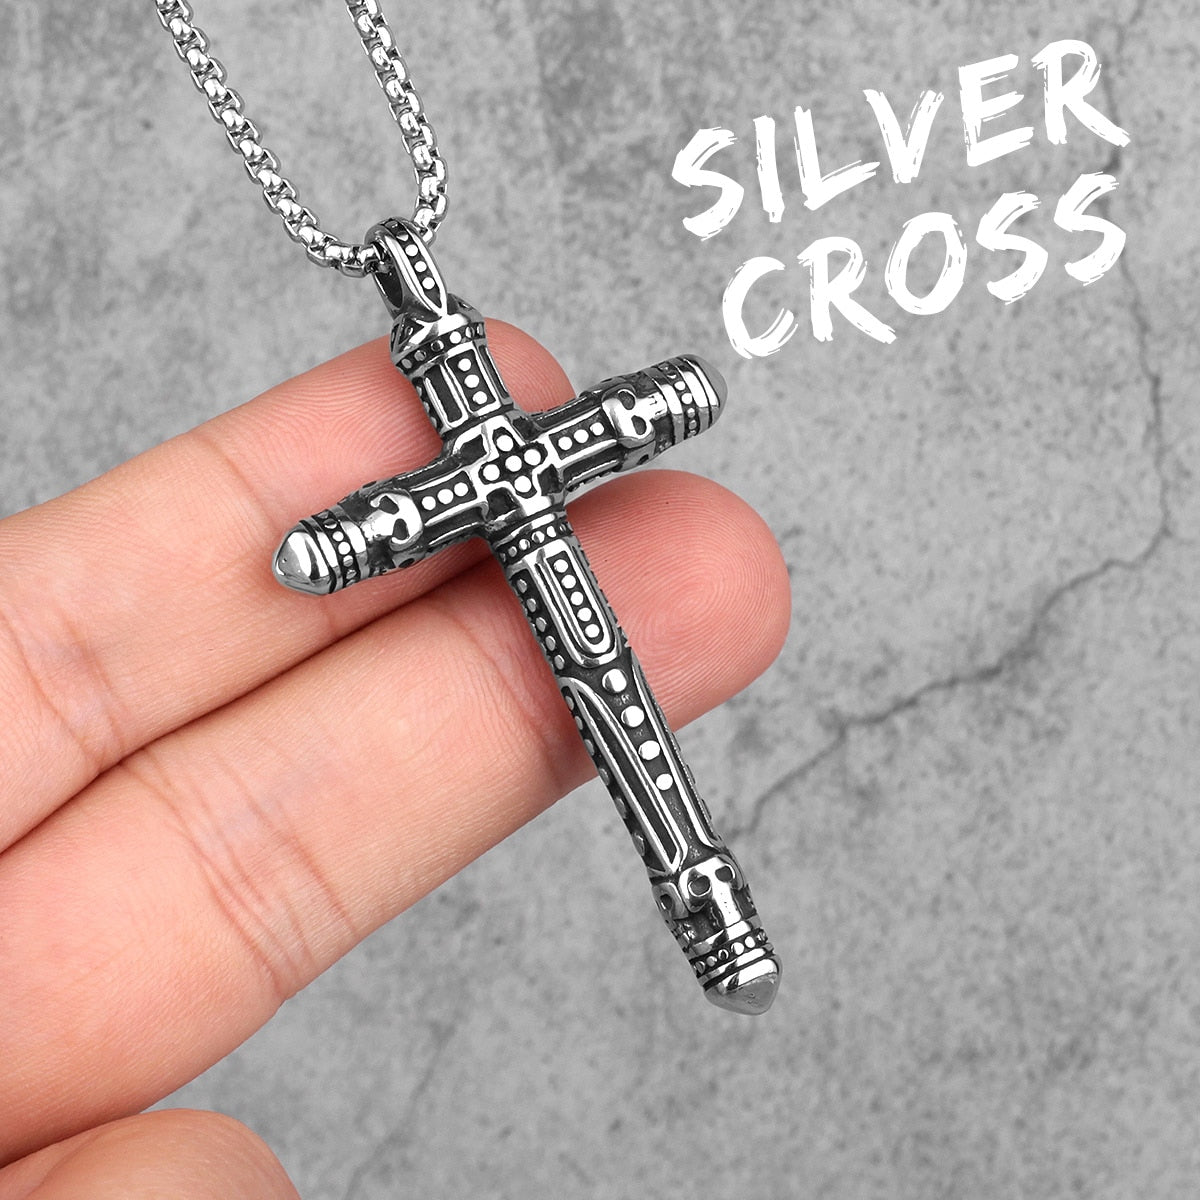 Silver Stainless Steel Cross Pendant Necklace Jewelry